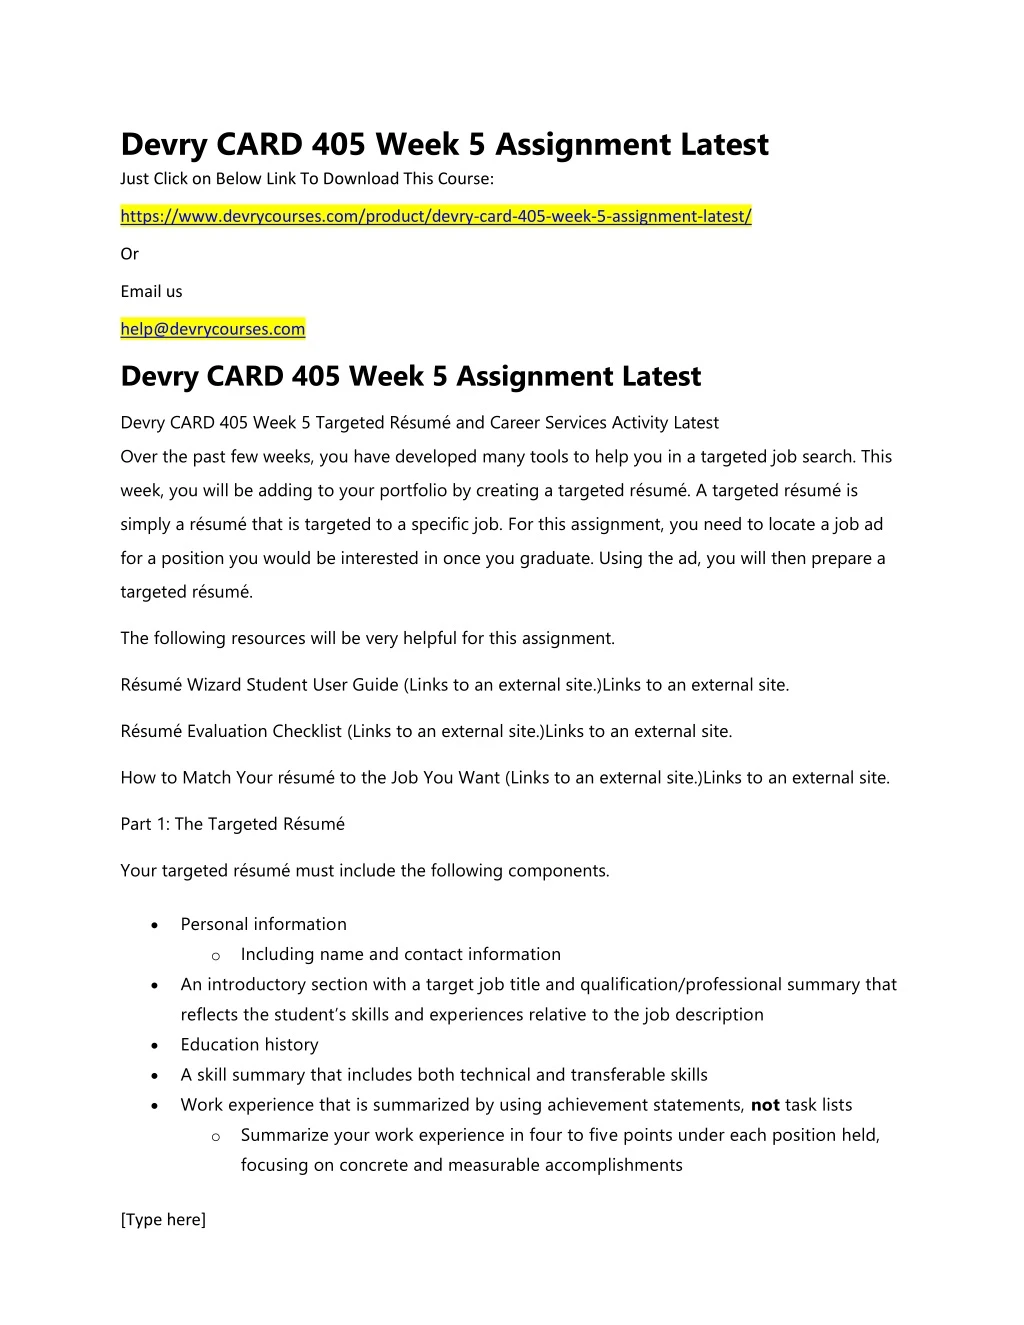 devry card 405 week 5 assignment latest just